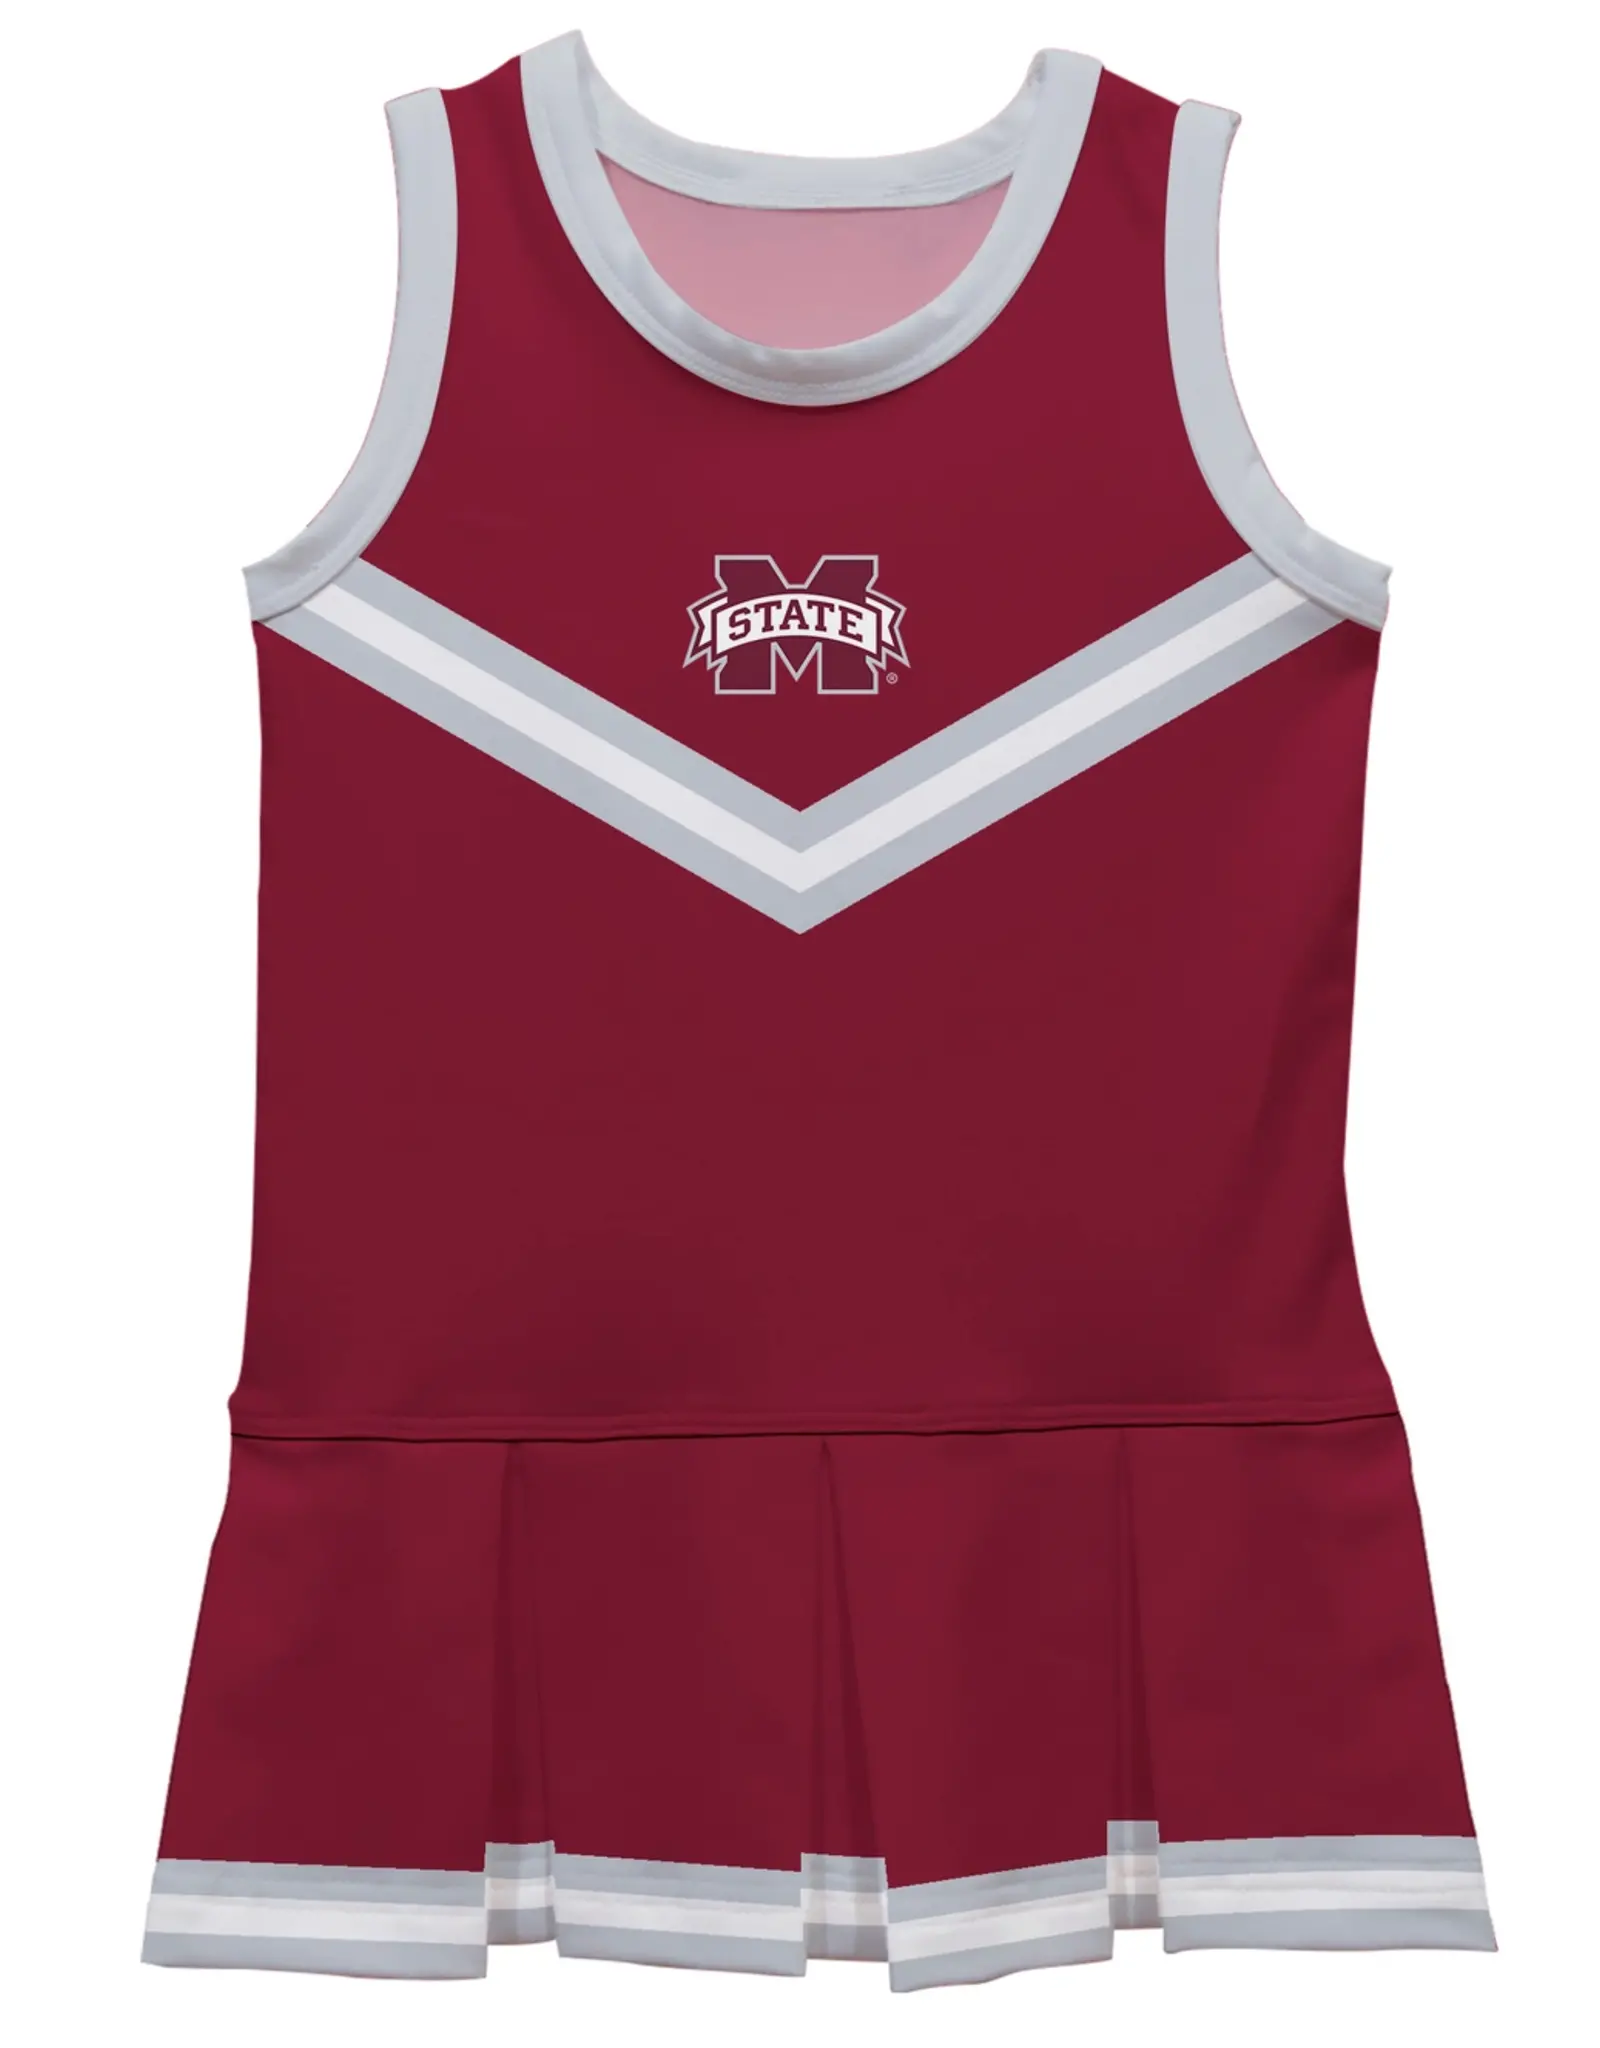 Mississippi State Cheerleader Outfit